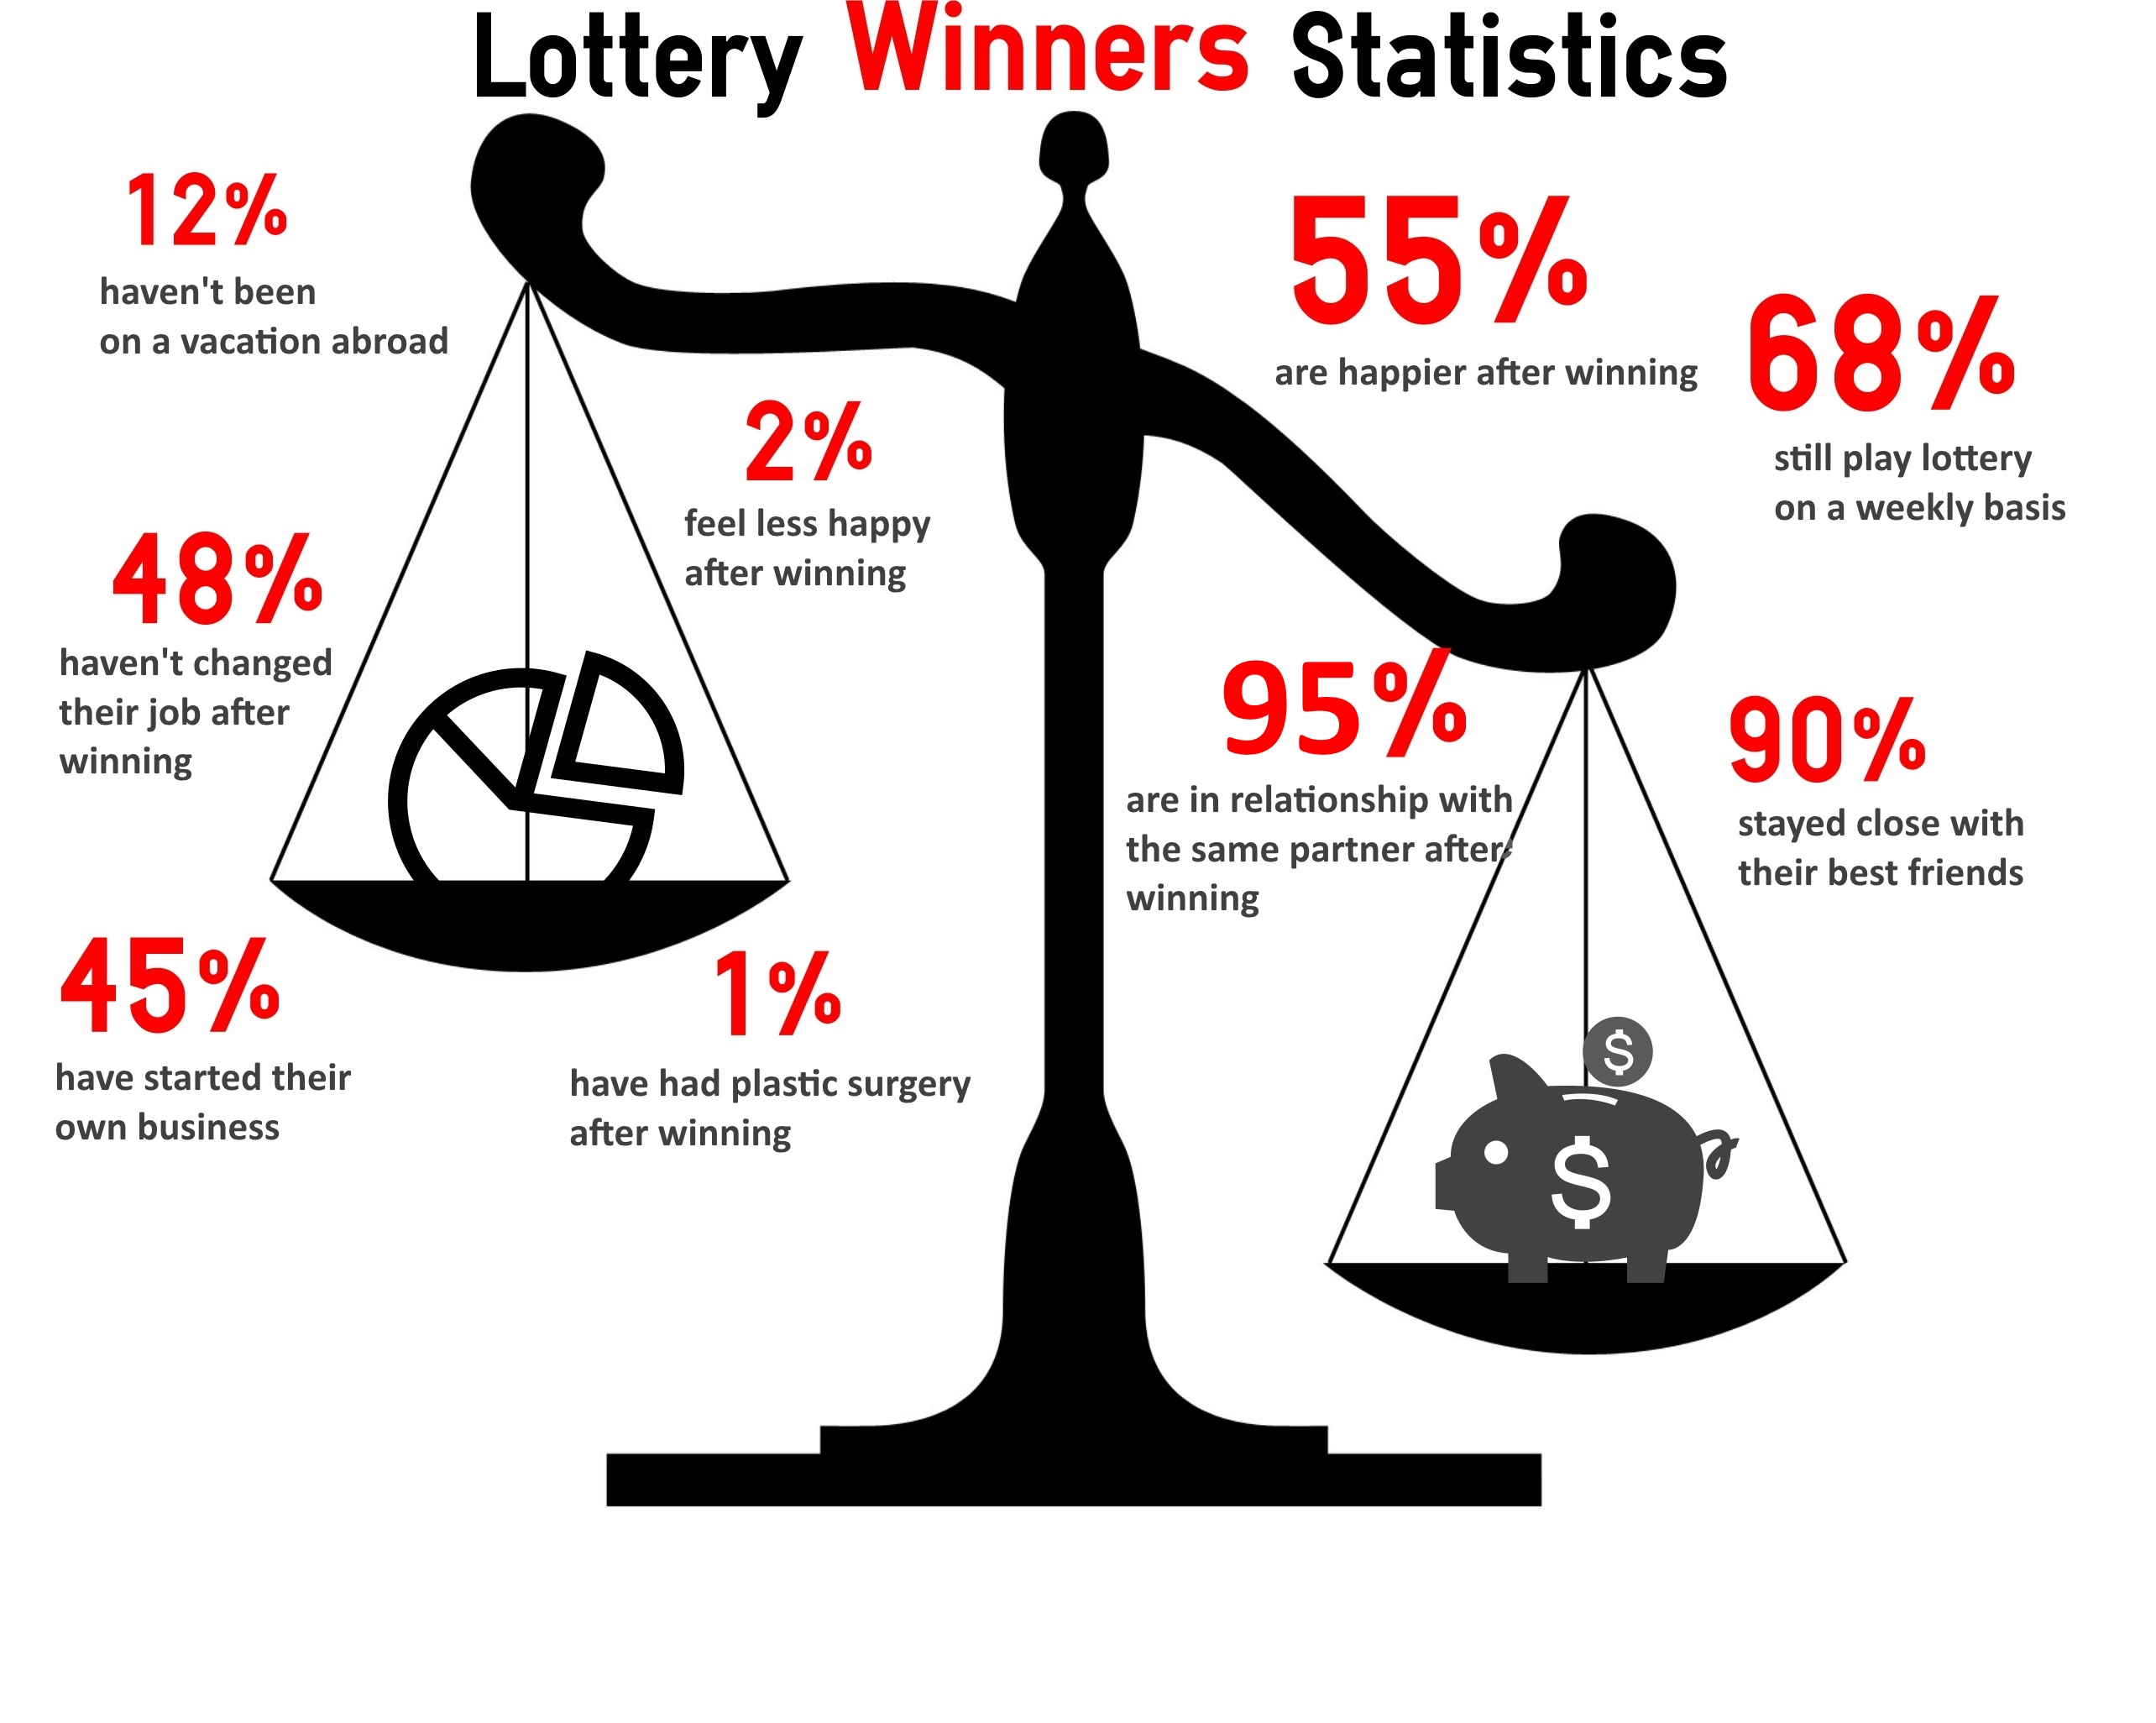 Winning the Lottery or Not – What's Better?